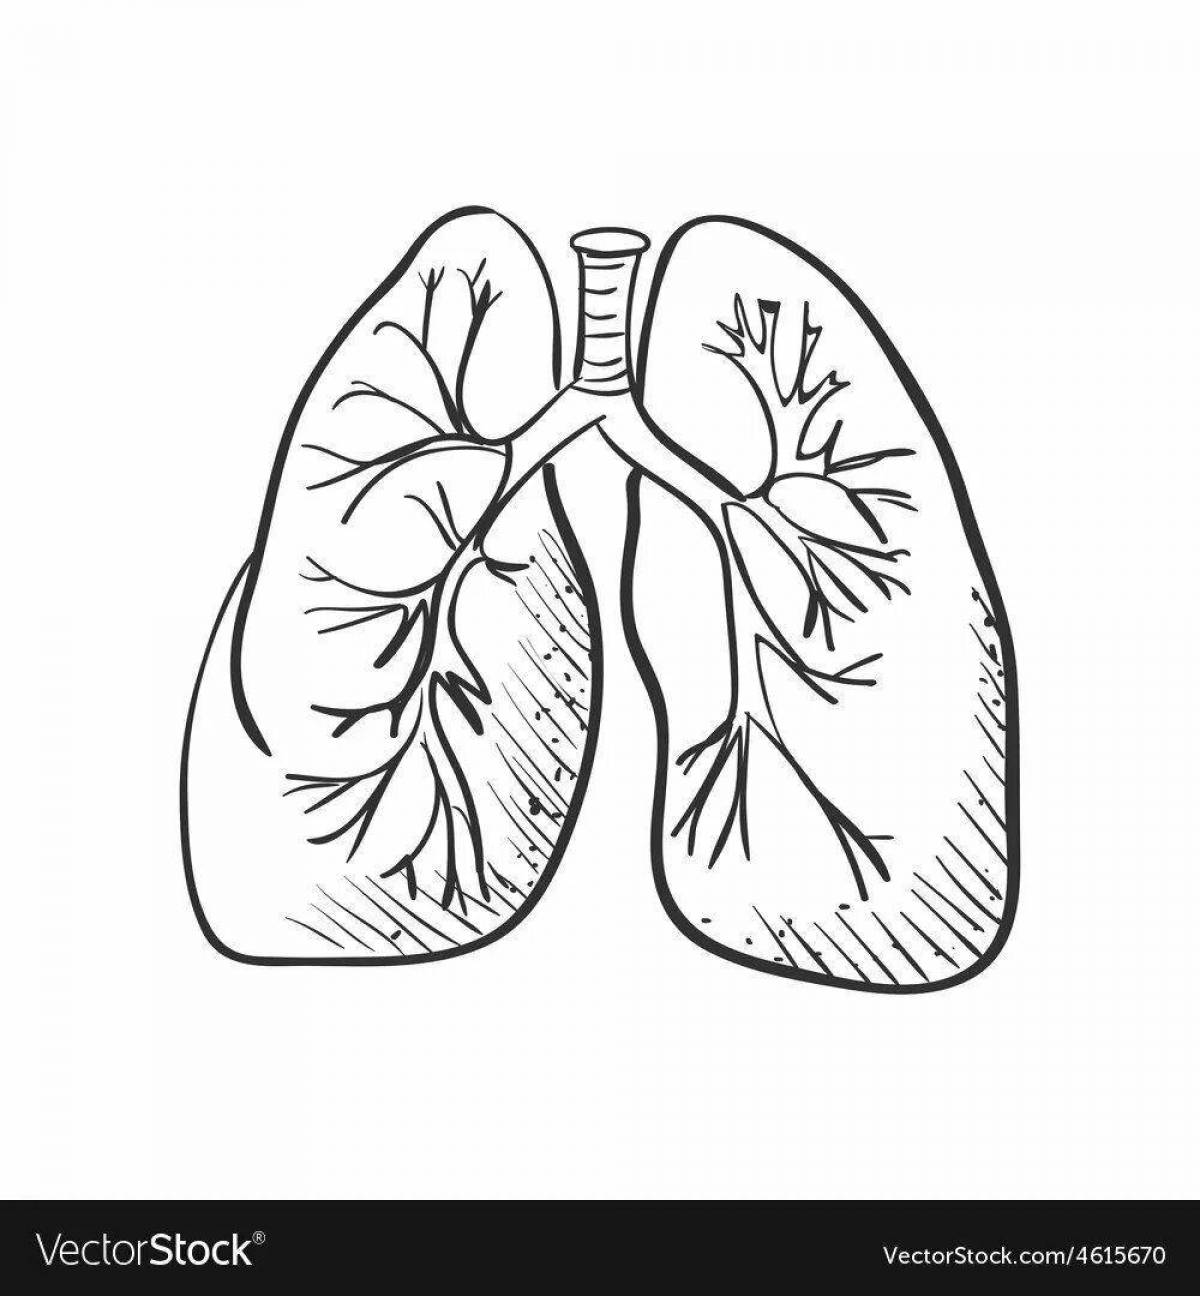 Human lungs for children #6